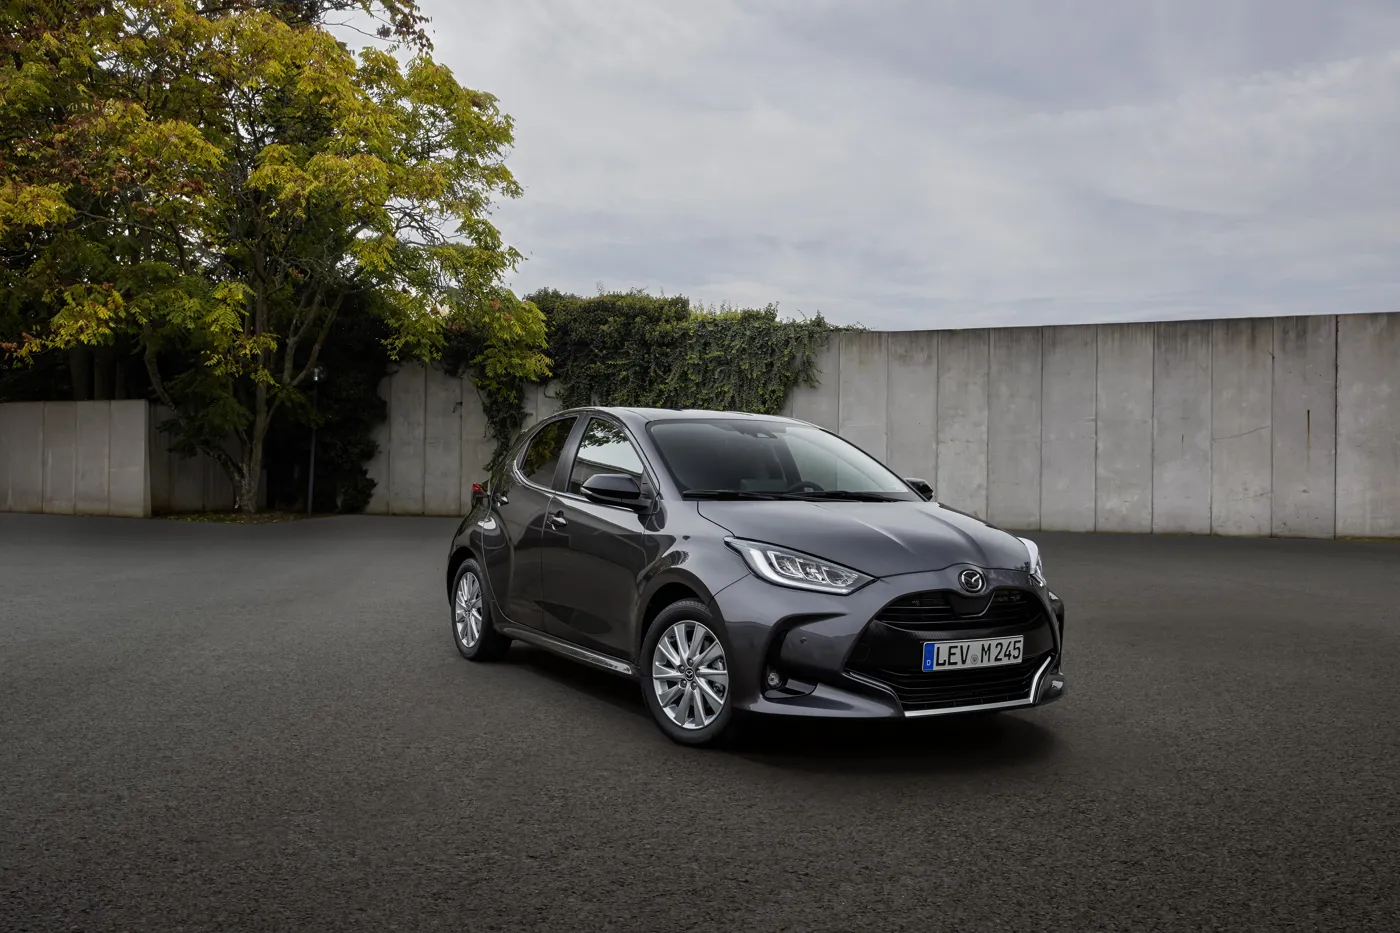 Mazda 2 hybrid: prices, specification and CO2 emissions